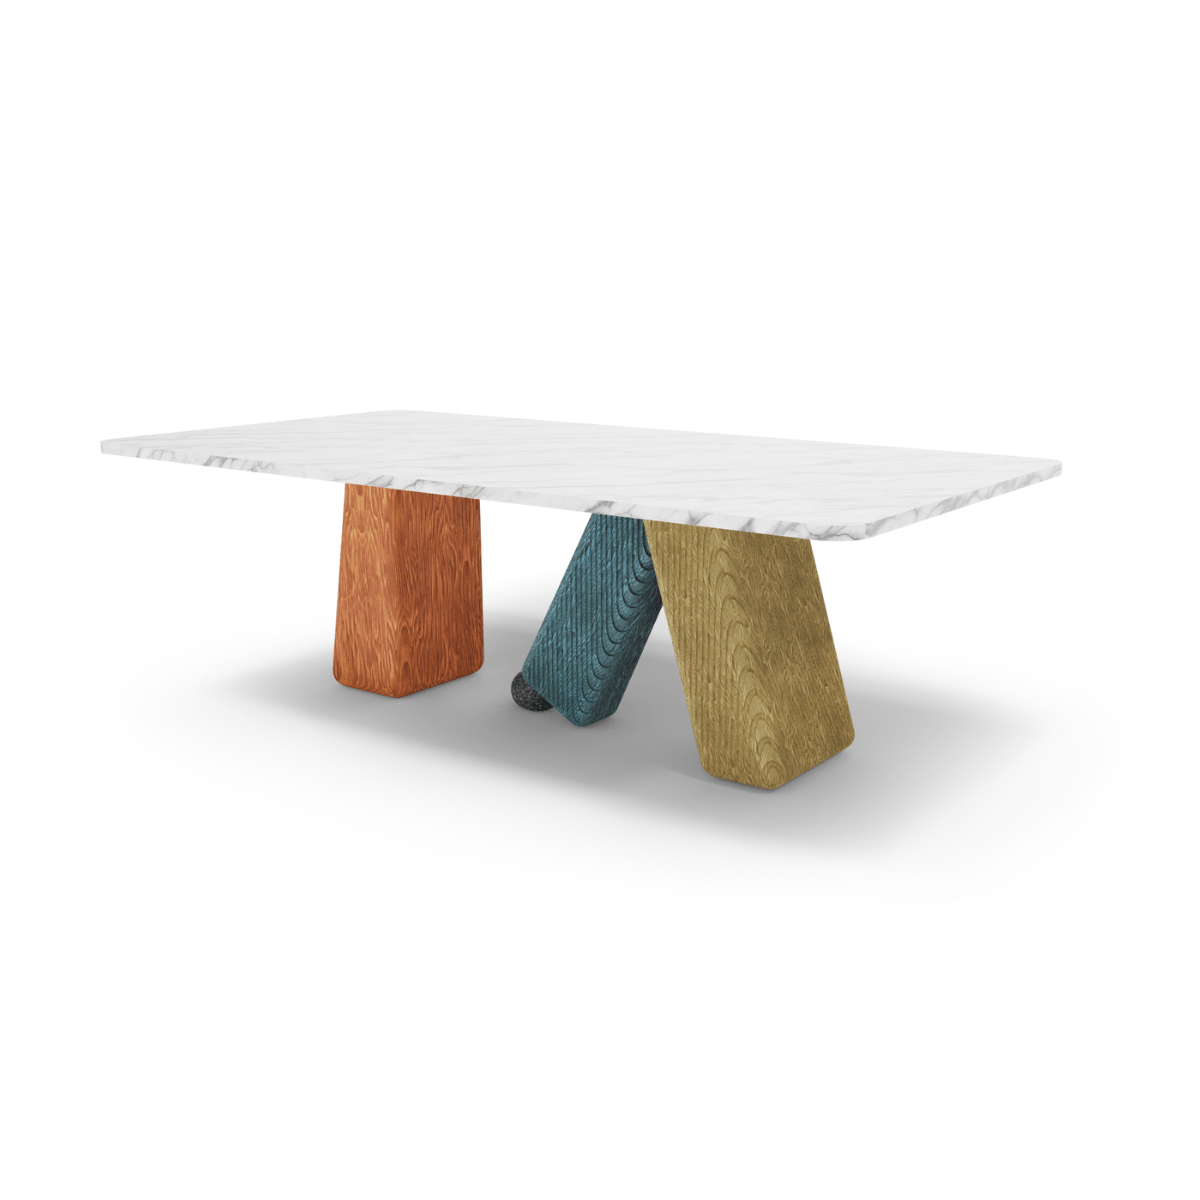 heel-stone-dining-table-covet-collection-ptang-studio